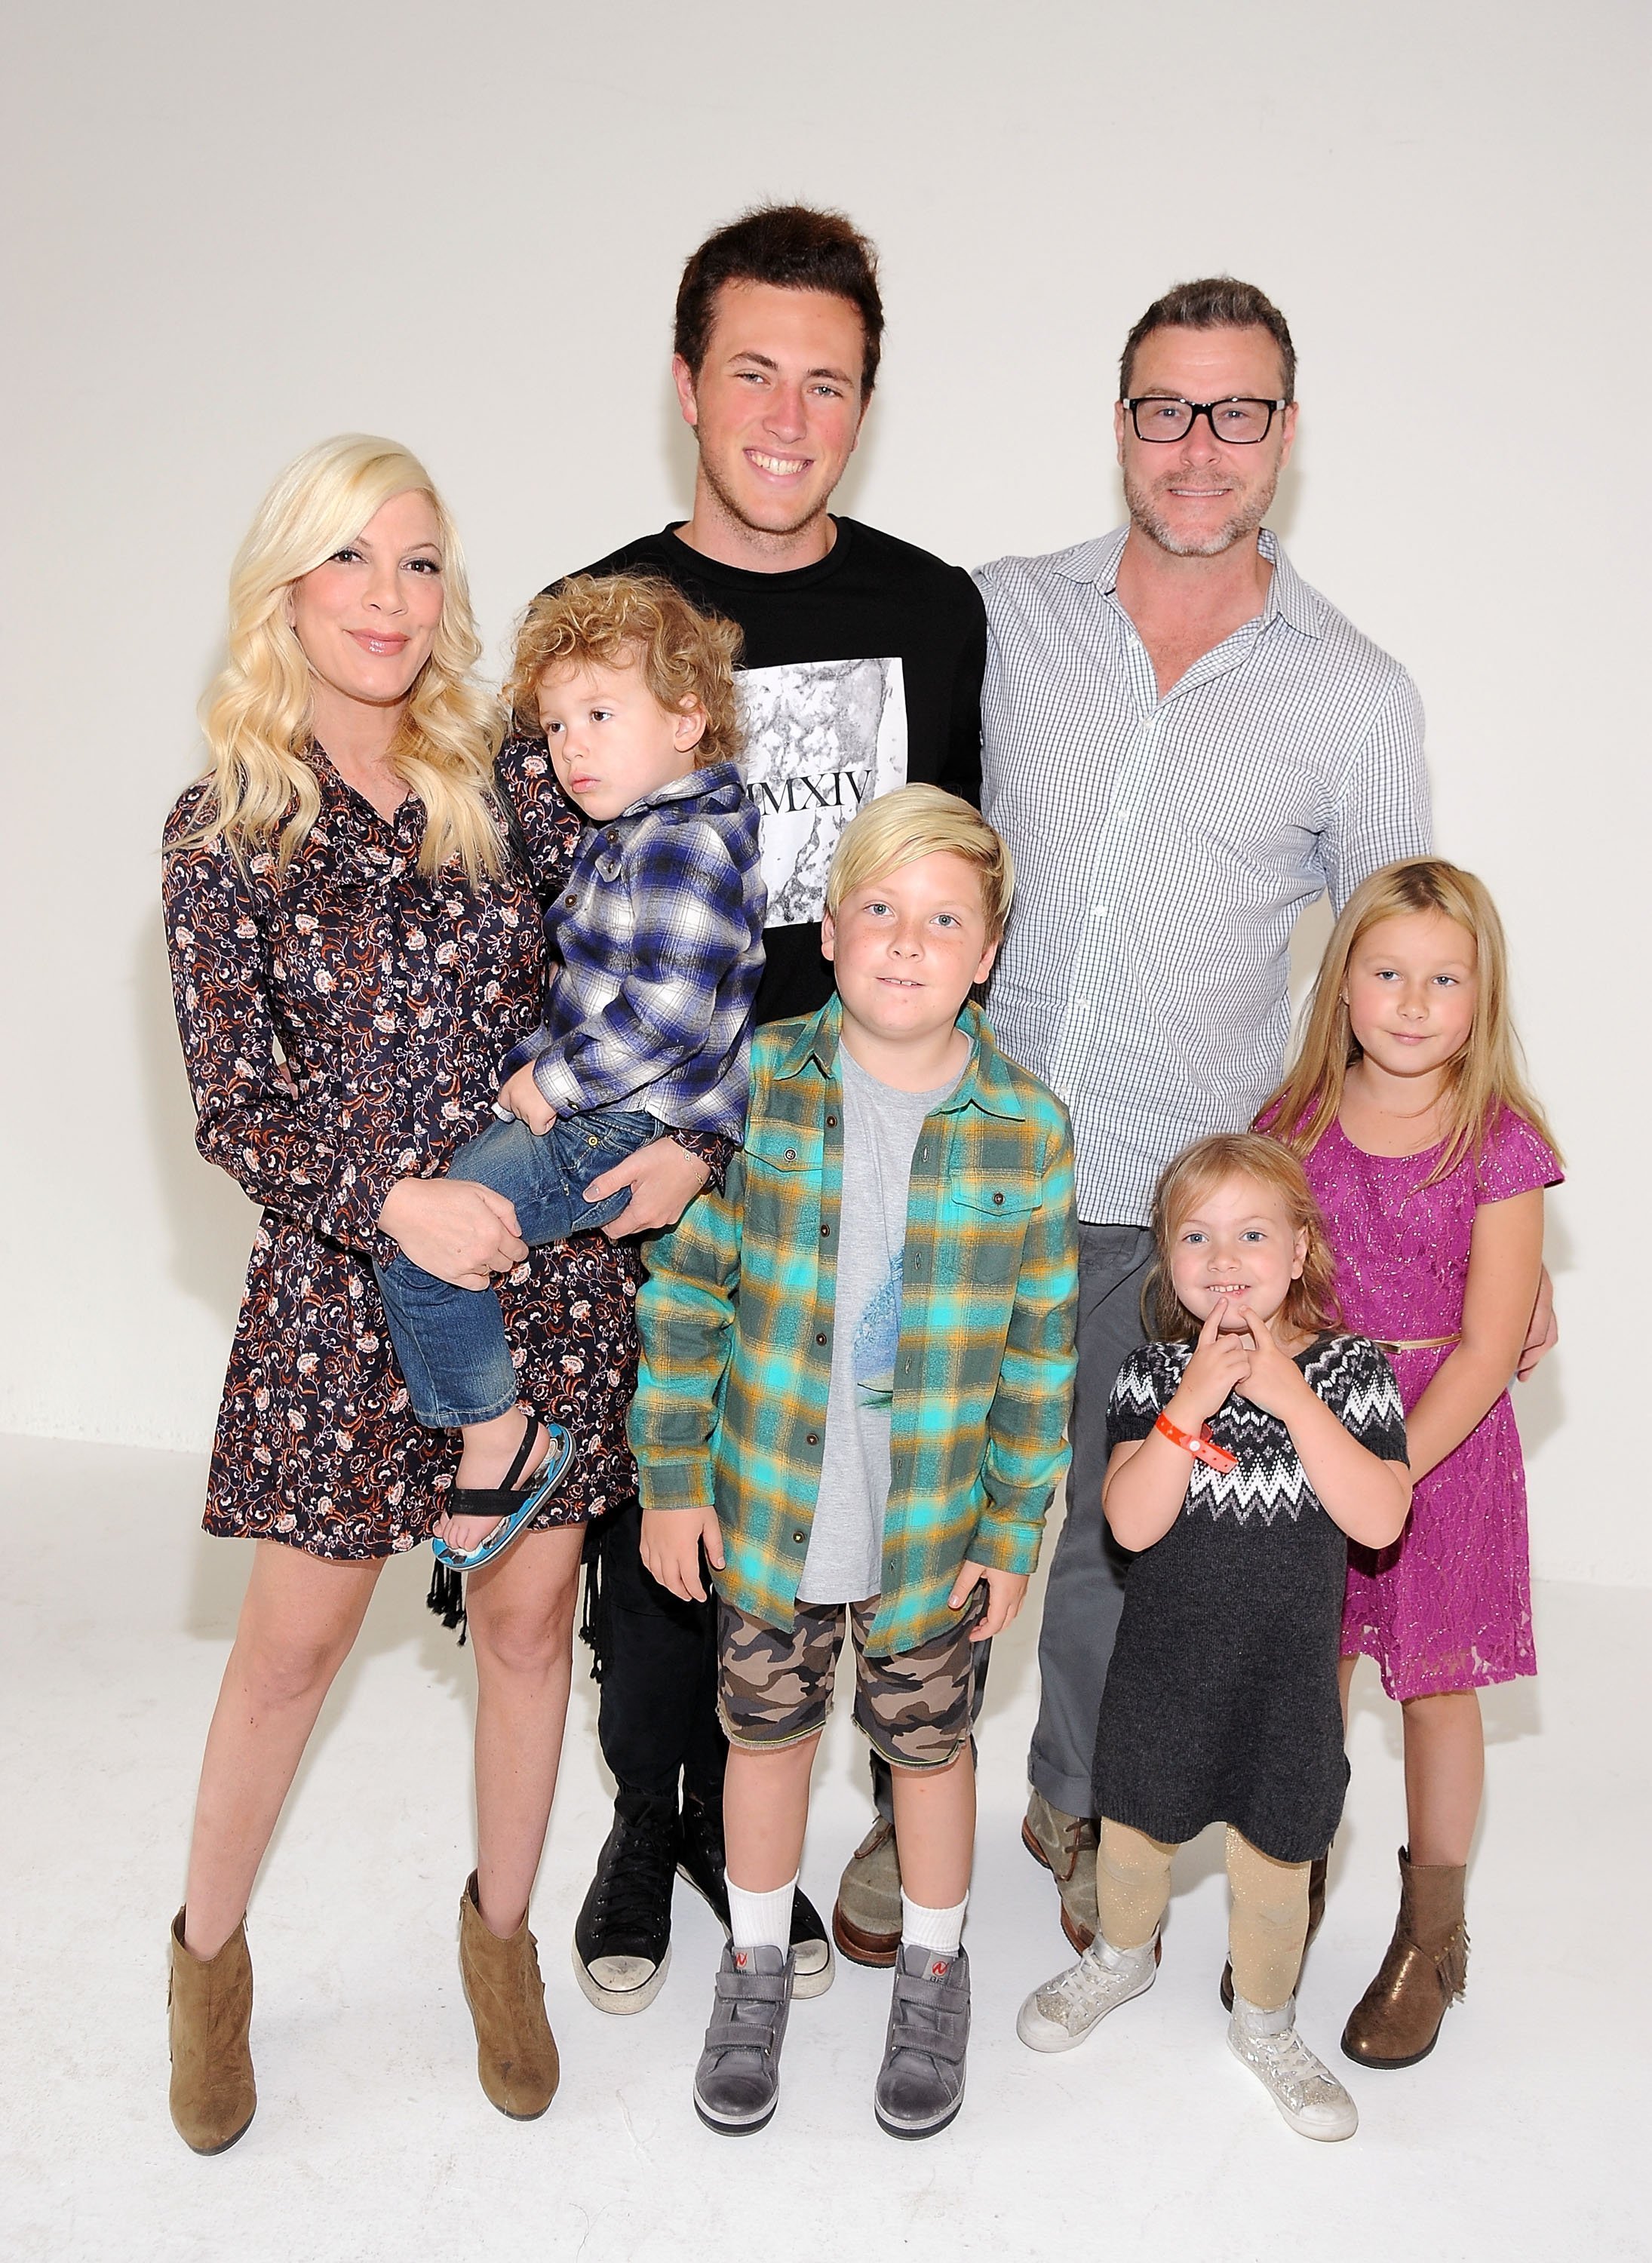 Tori Spelling From Bh90210 Shares Adorable Christmas Photo With Her Husband Dean Mcdermott